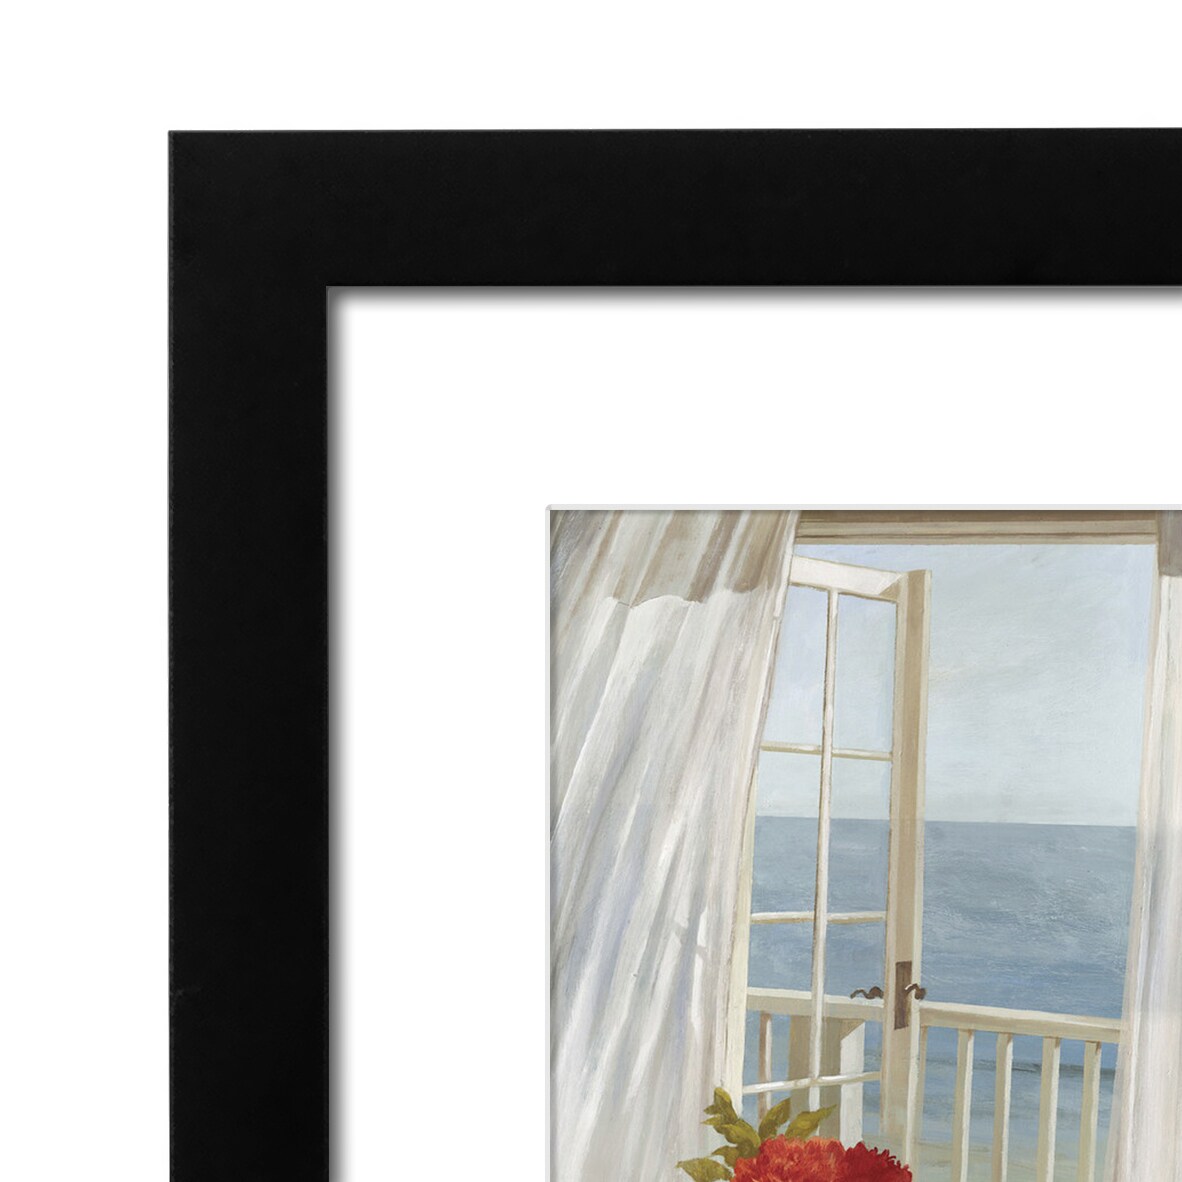 Americanflat Out to Sea 8 Piece Framed Gallery Wall Art Set